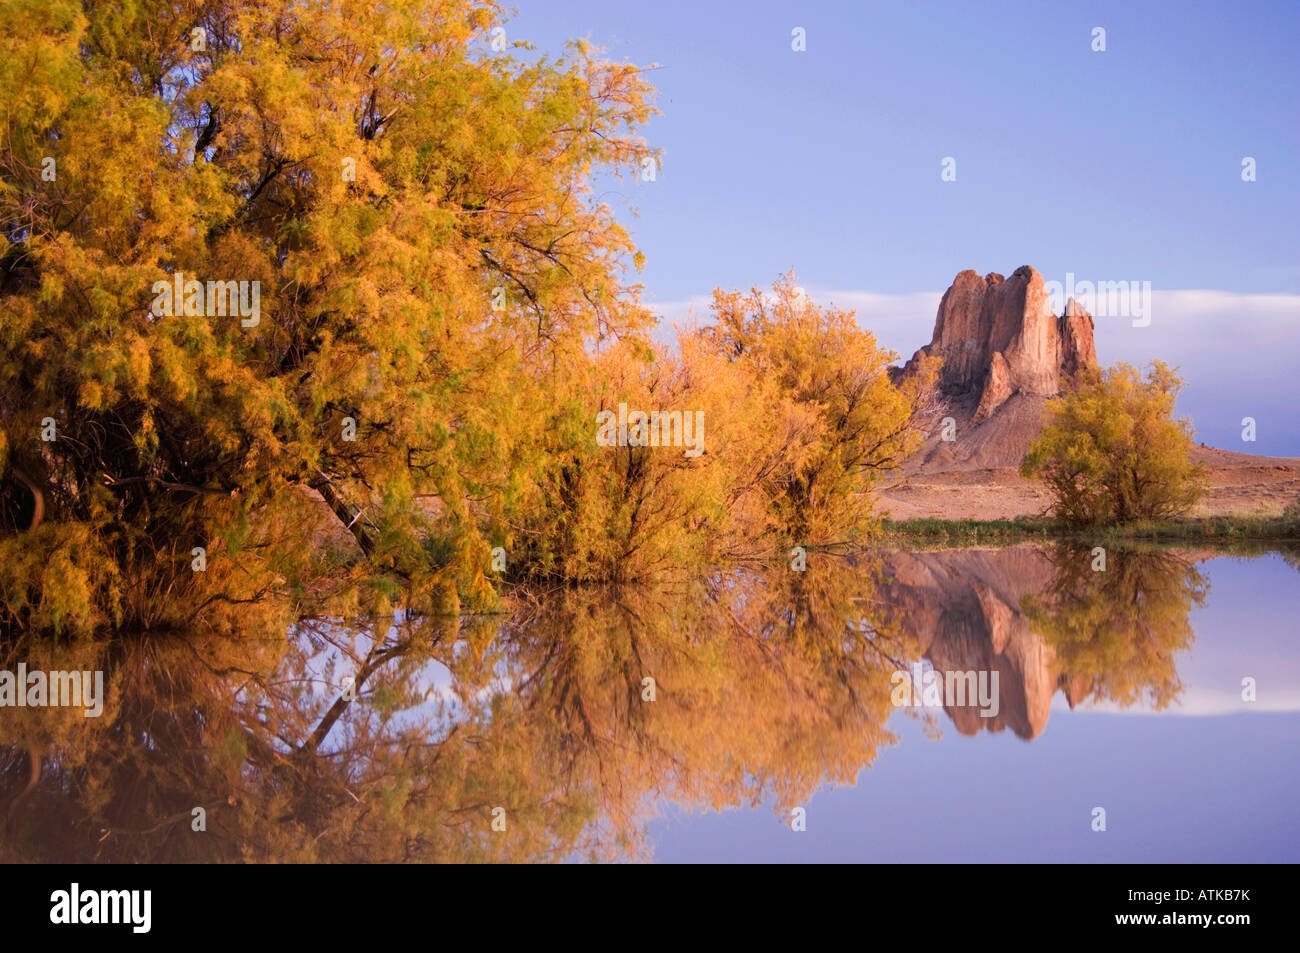 Rocks reflecting in pond with Salt Cedars at dusk Shiprock Navajo Indian Reserve New Mexico USA September 2006 Stock Photo